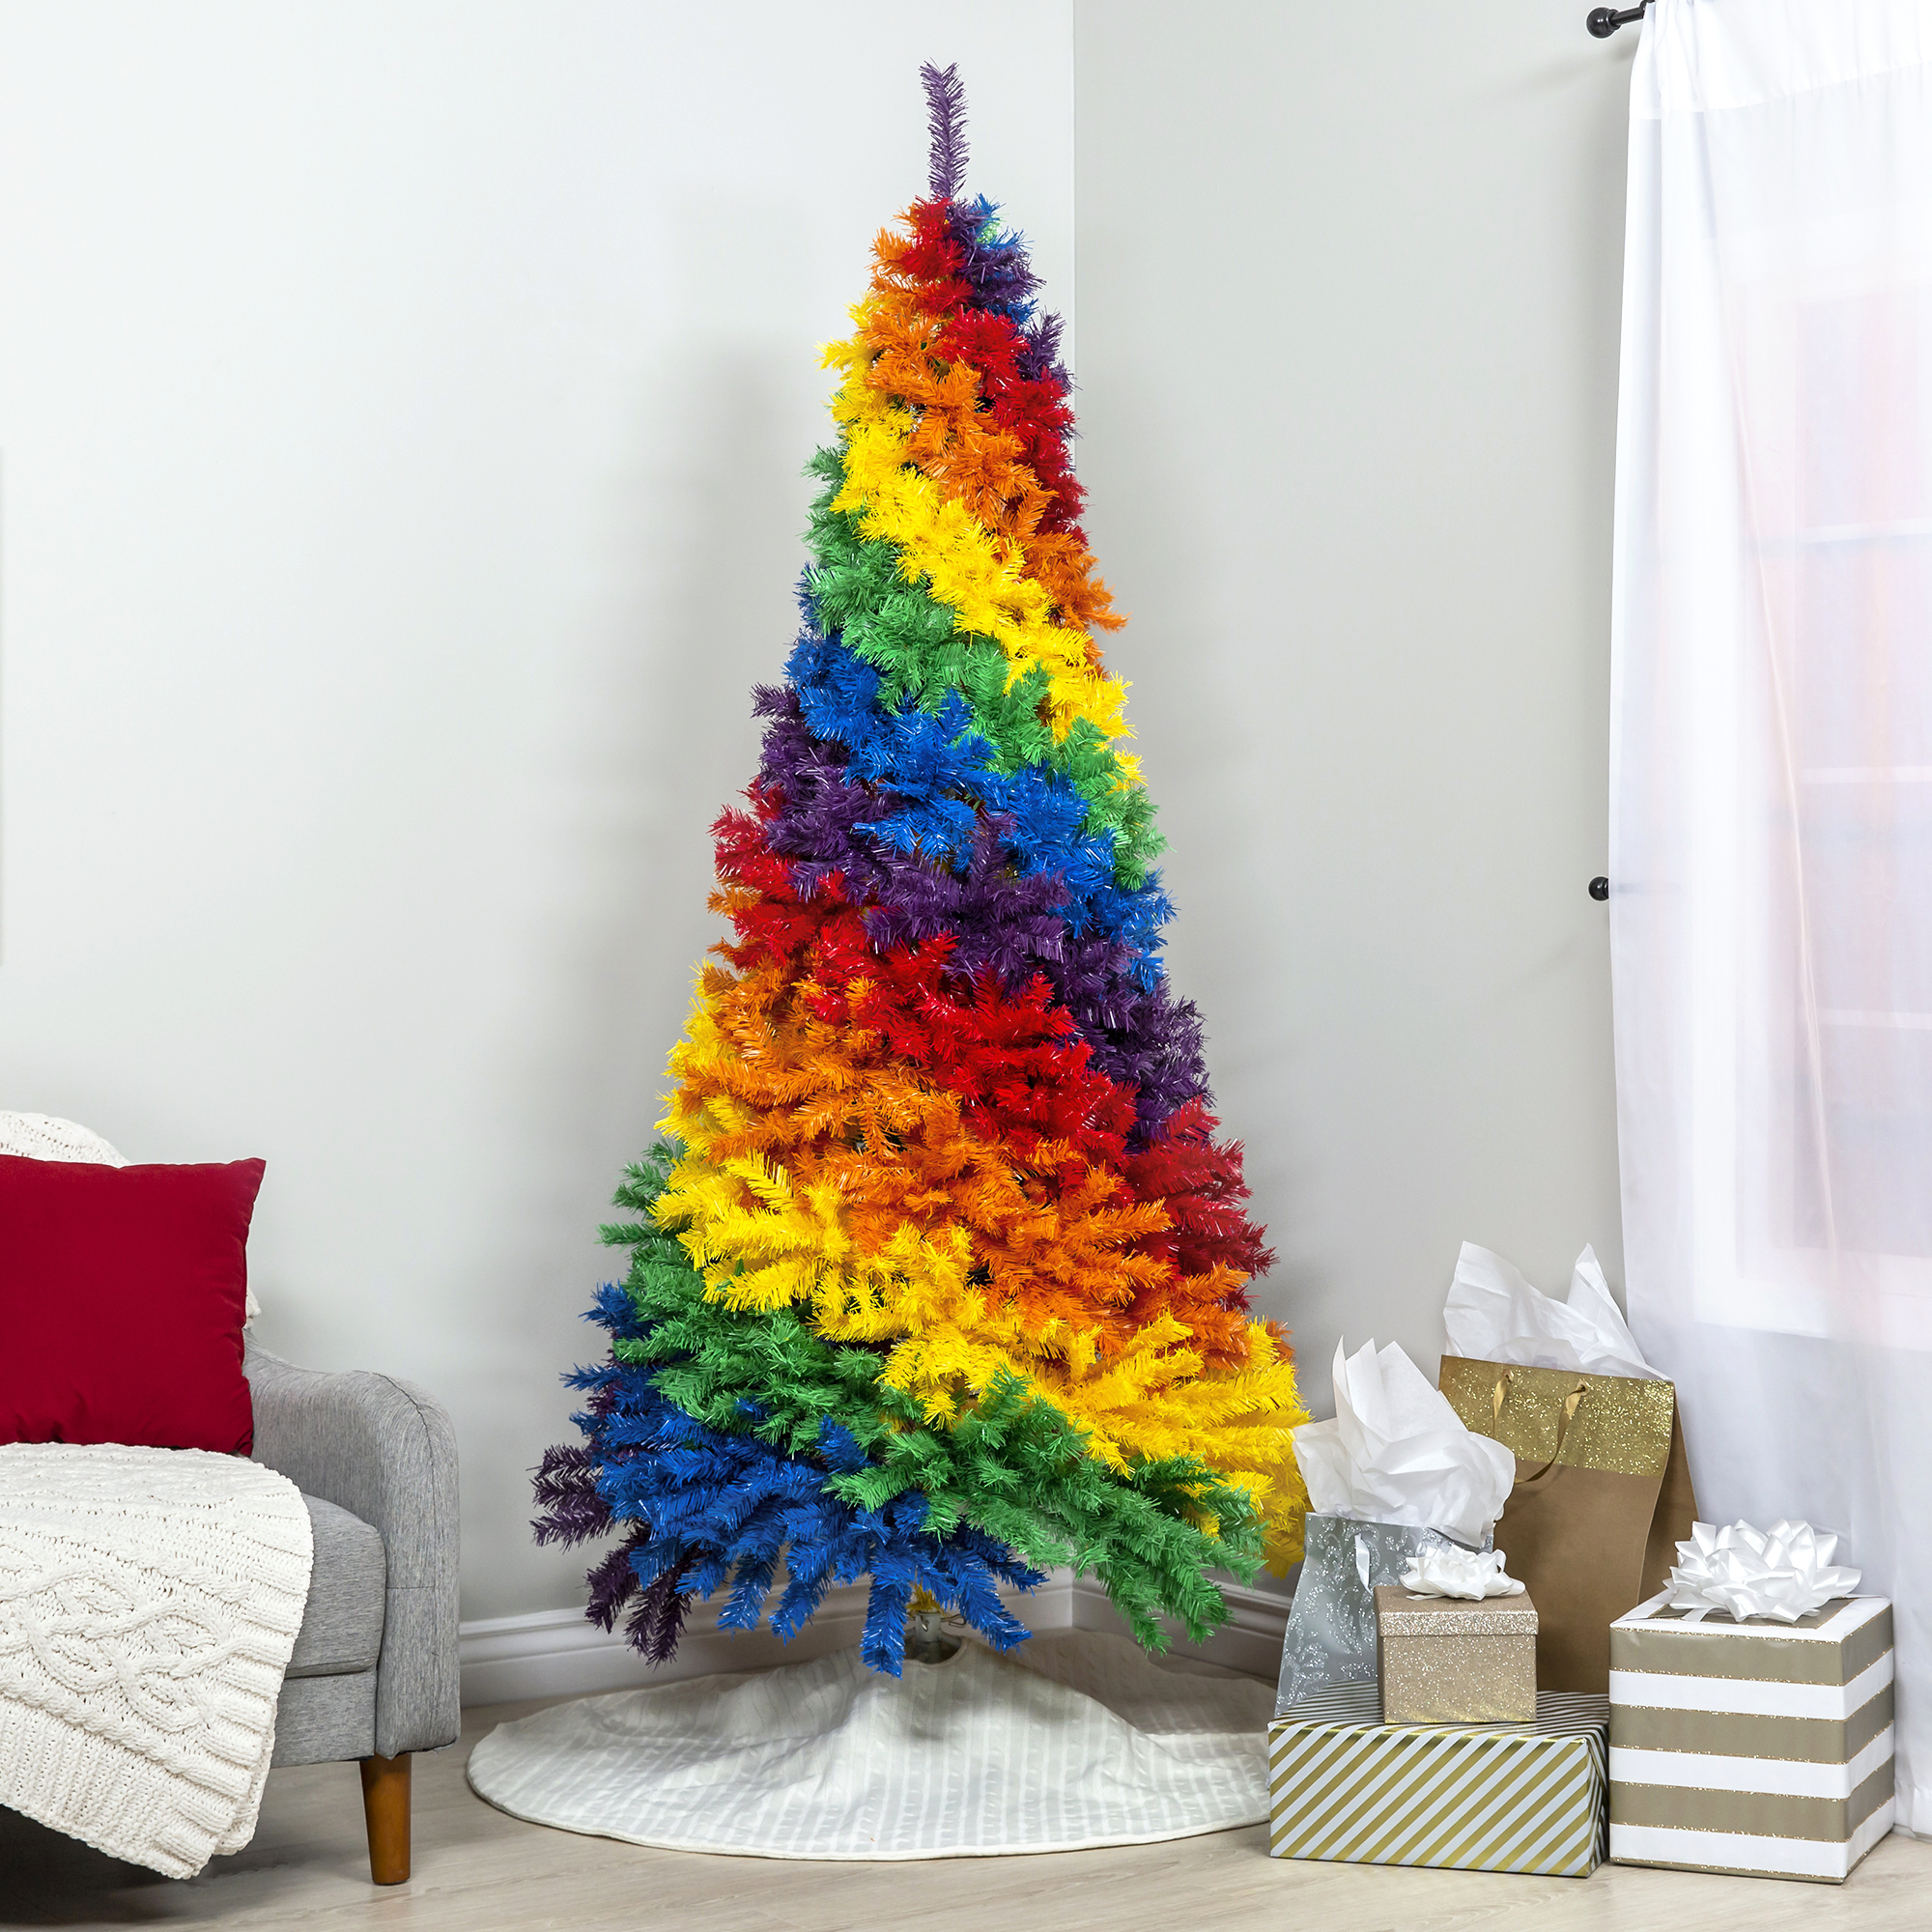 Best Choice Products 7ft Artificial Colorful Rainbow Christmas Tree, Full Fir Holiday Decor w/ 1,213 Tips, Metal Stand - image 4 of 8